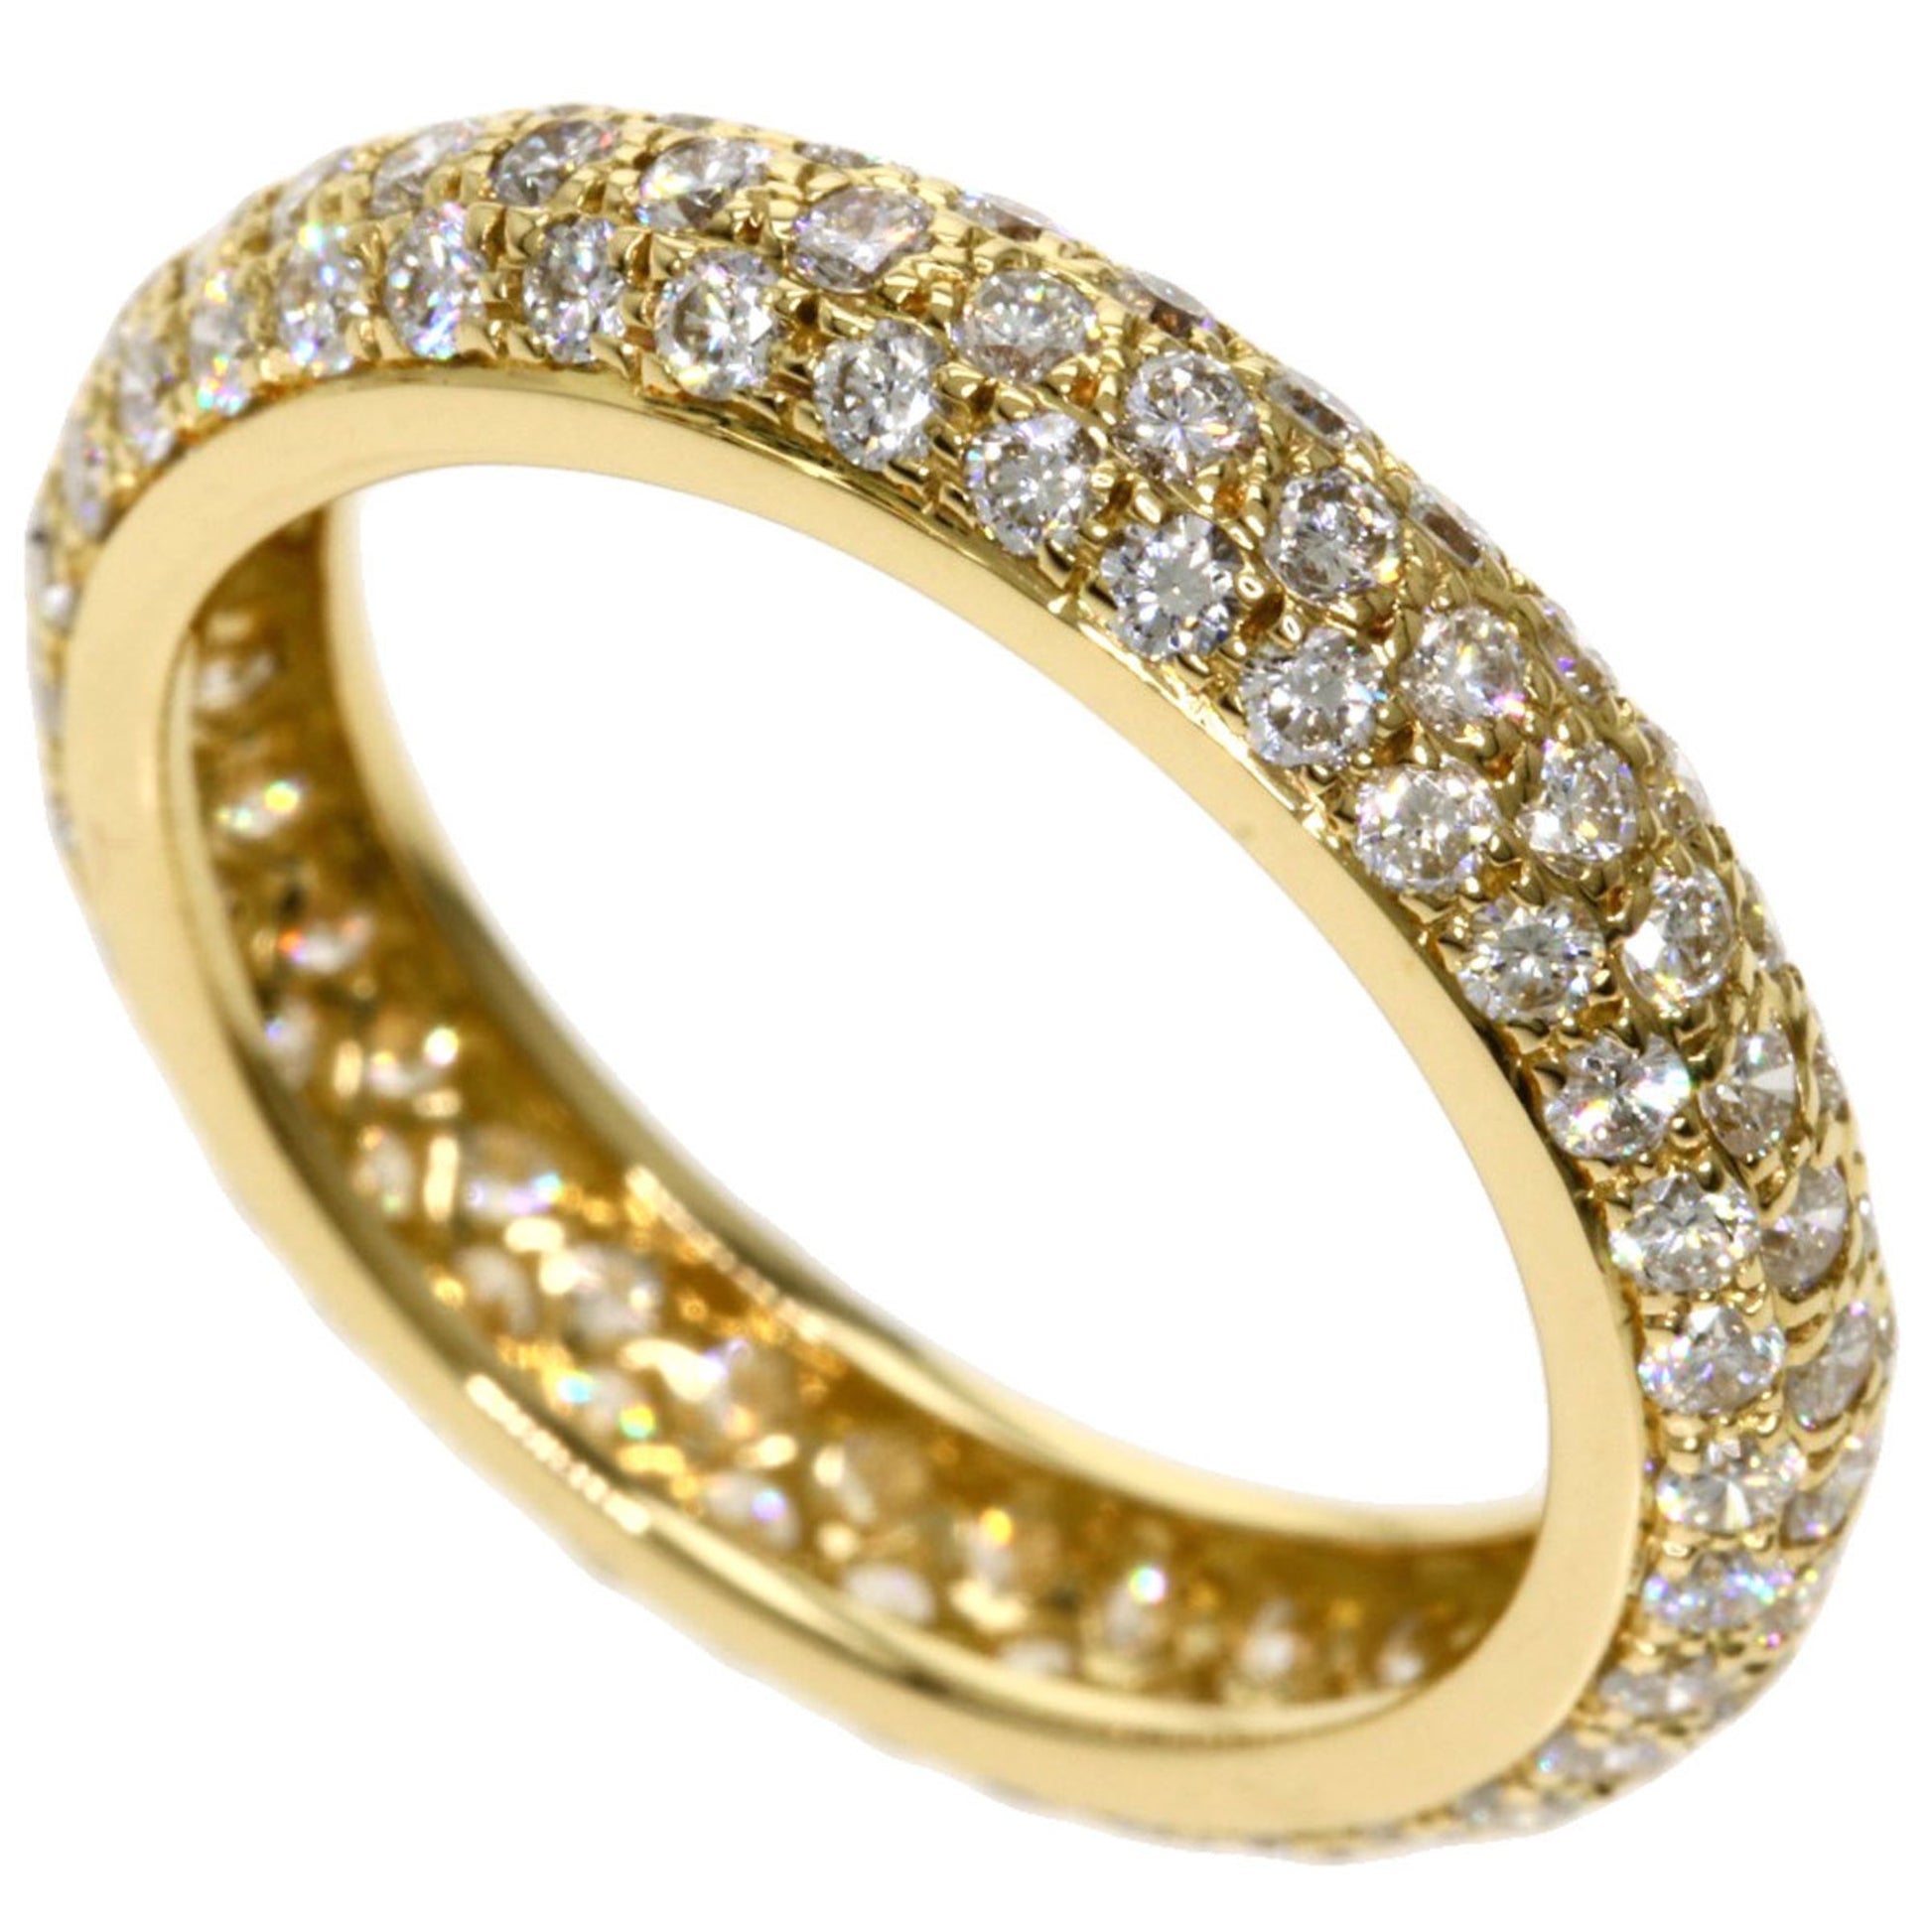 Cartier Pave Eternity Full Diamond Ring in 18K Yellow Gold For Sale